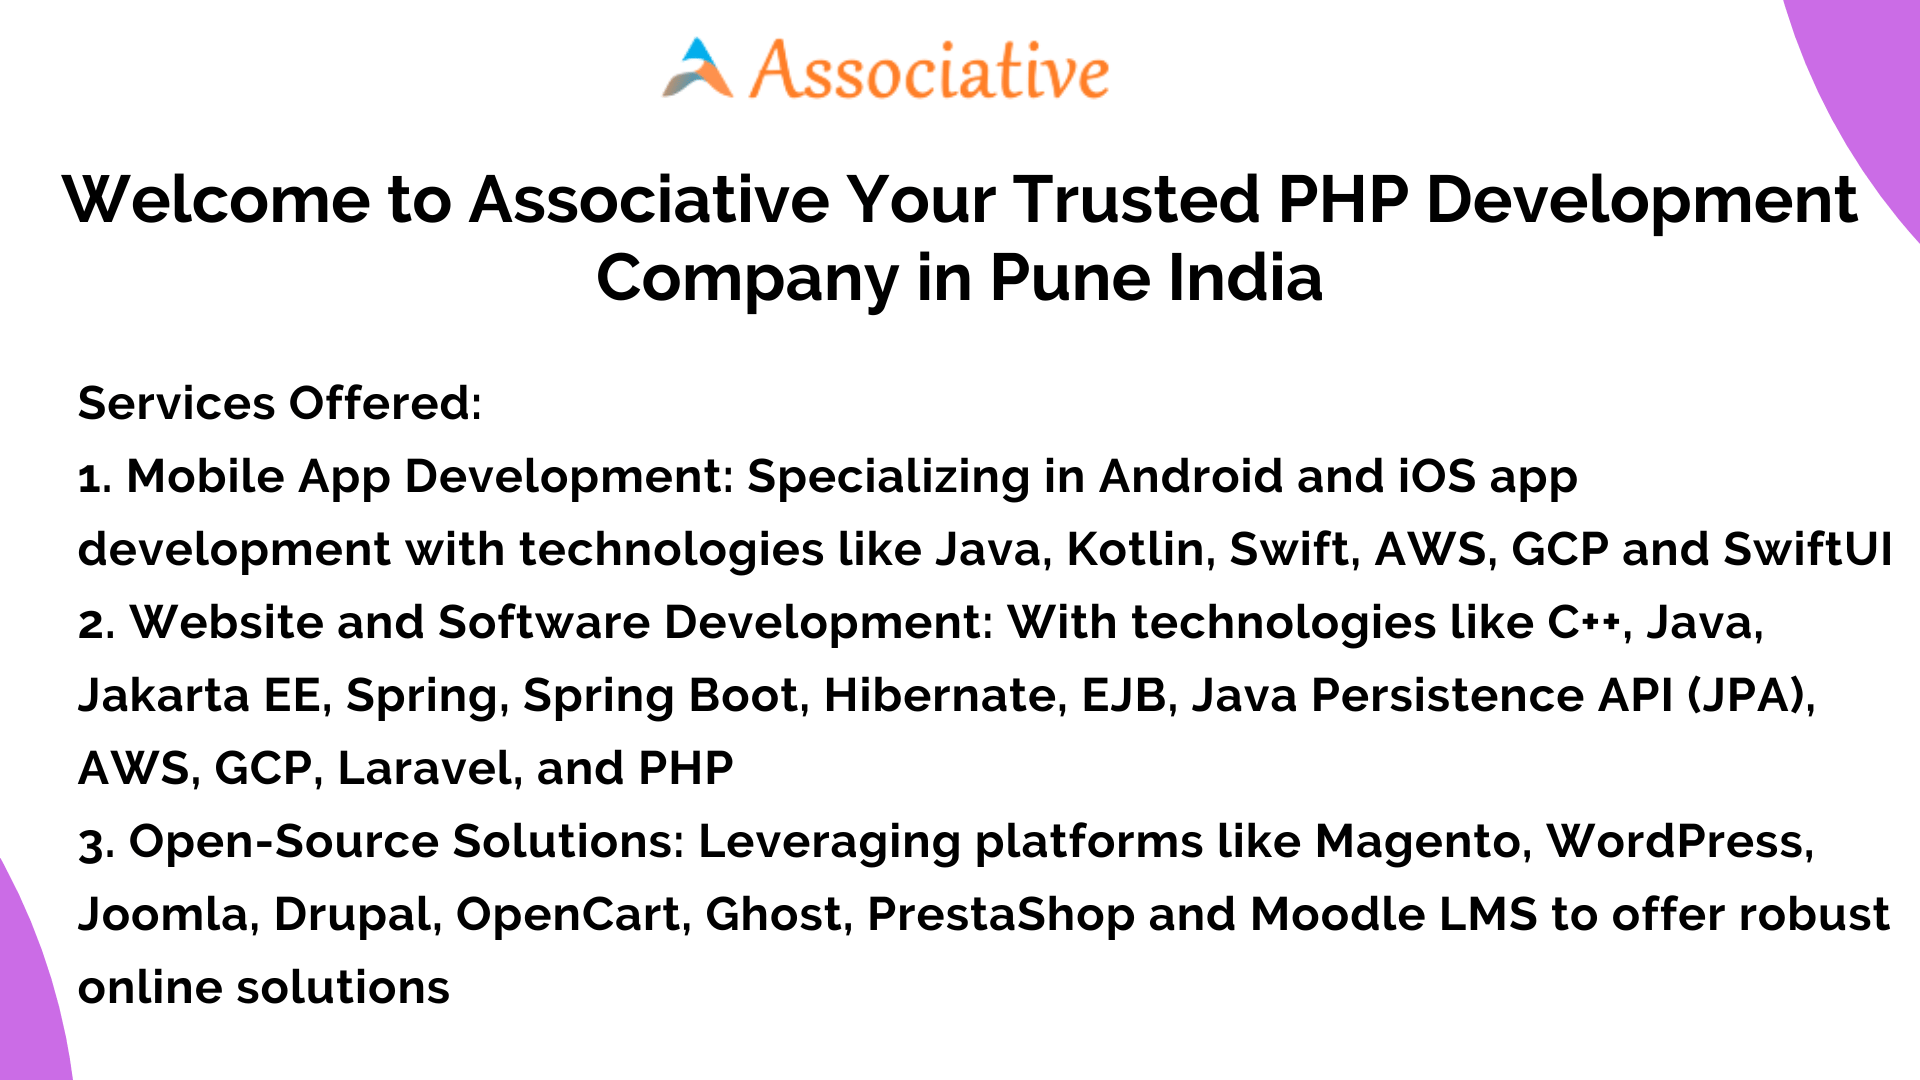 Welcome to Associative Your Trusted PHP Development Company in Pune India